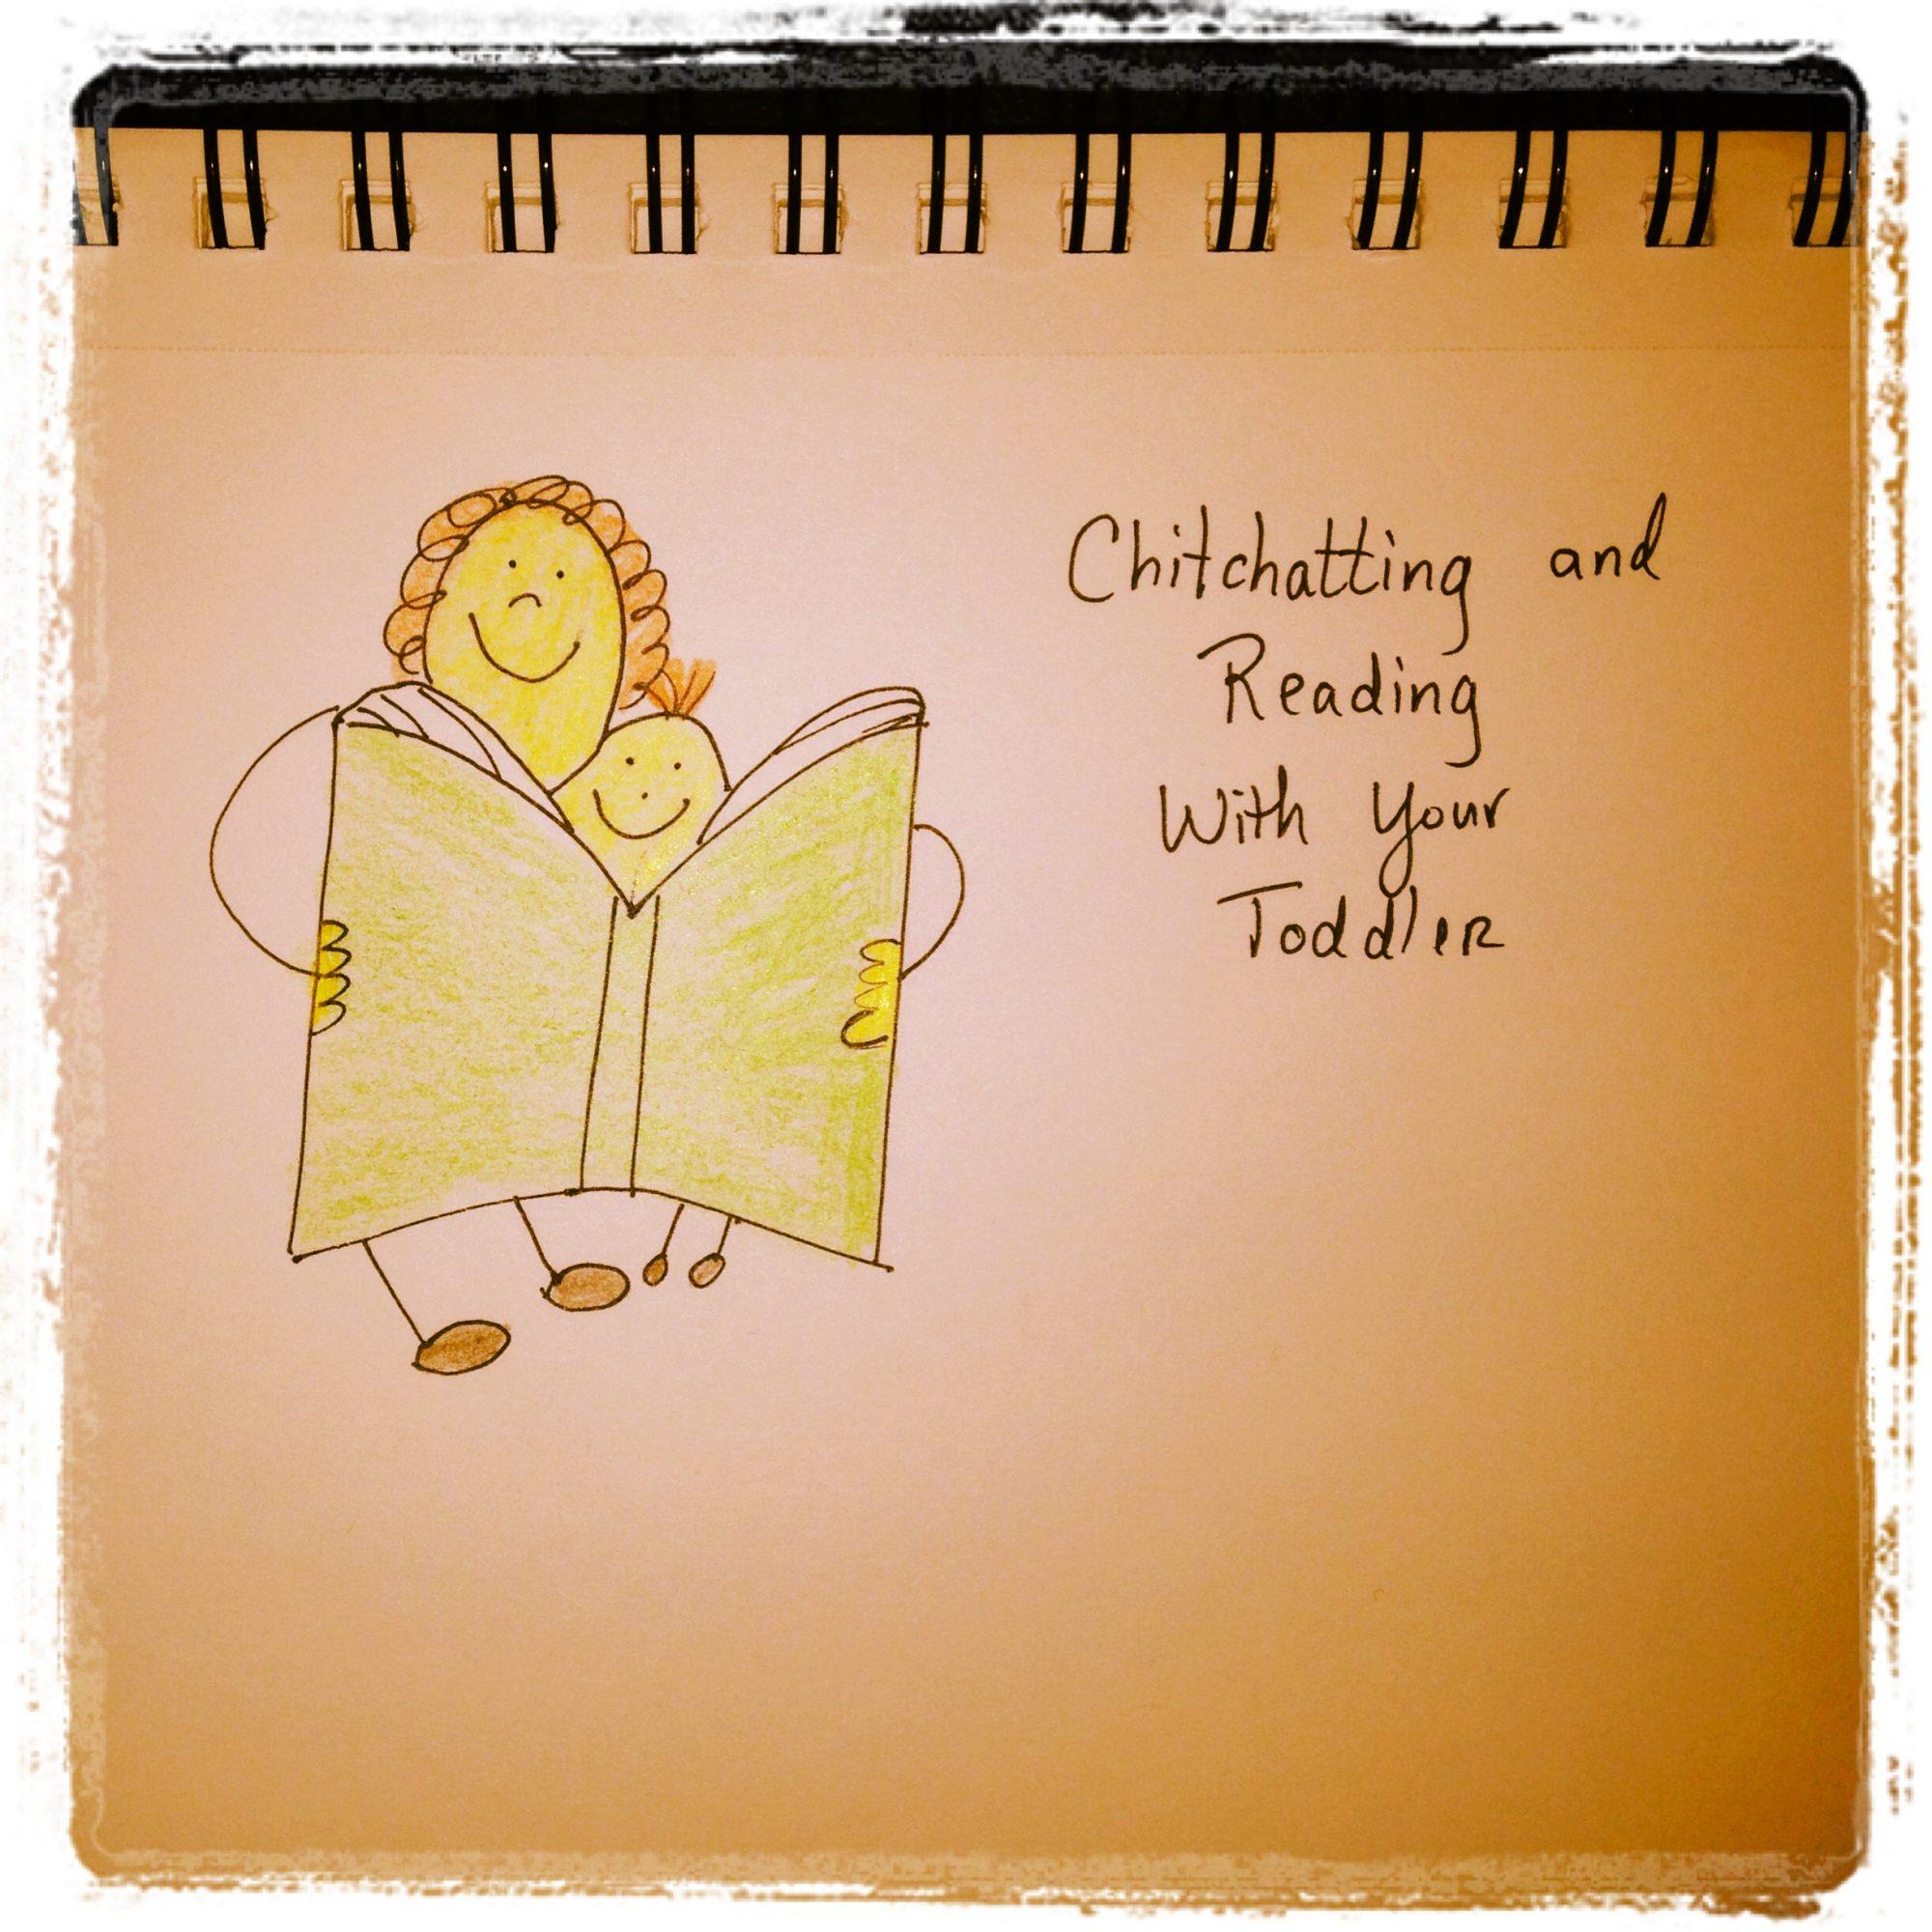 Chitchatting and Reading with Your Toddler